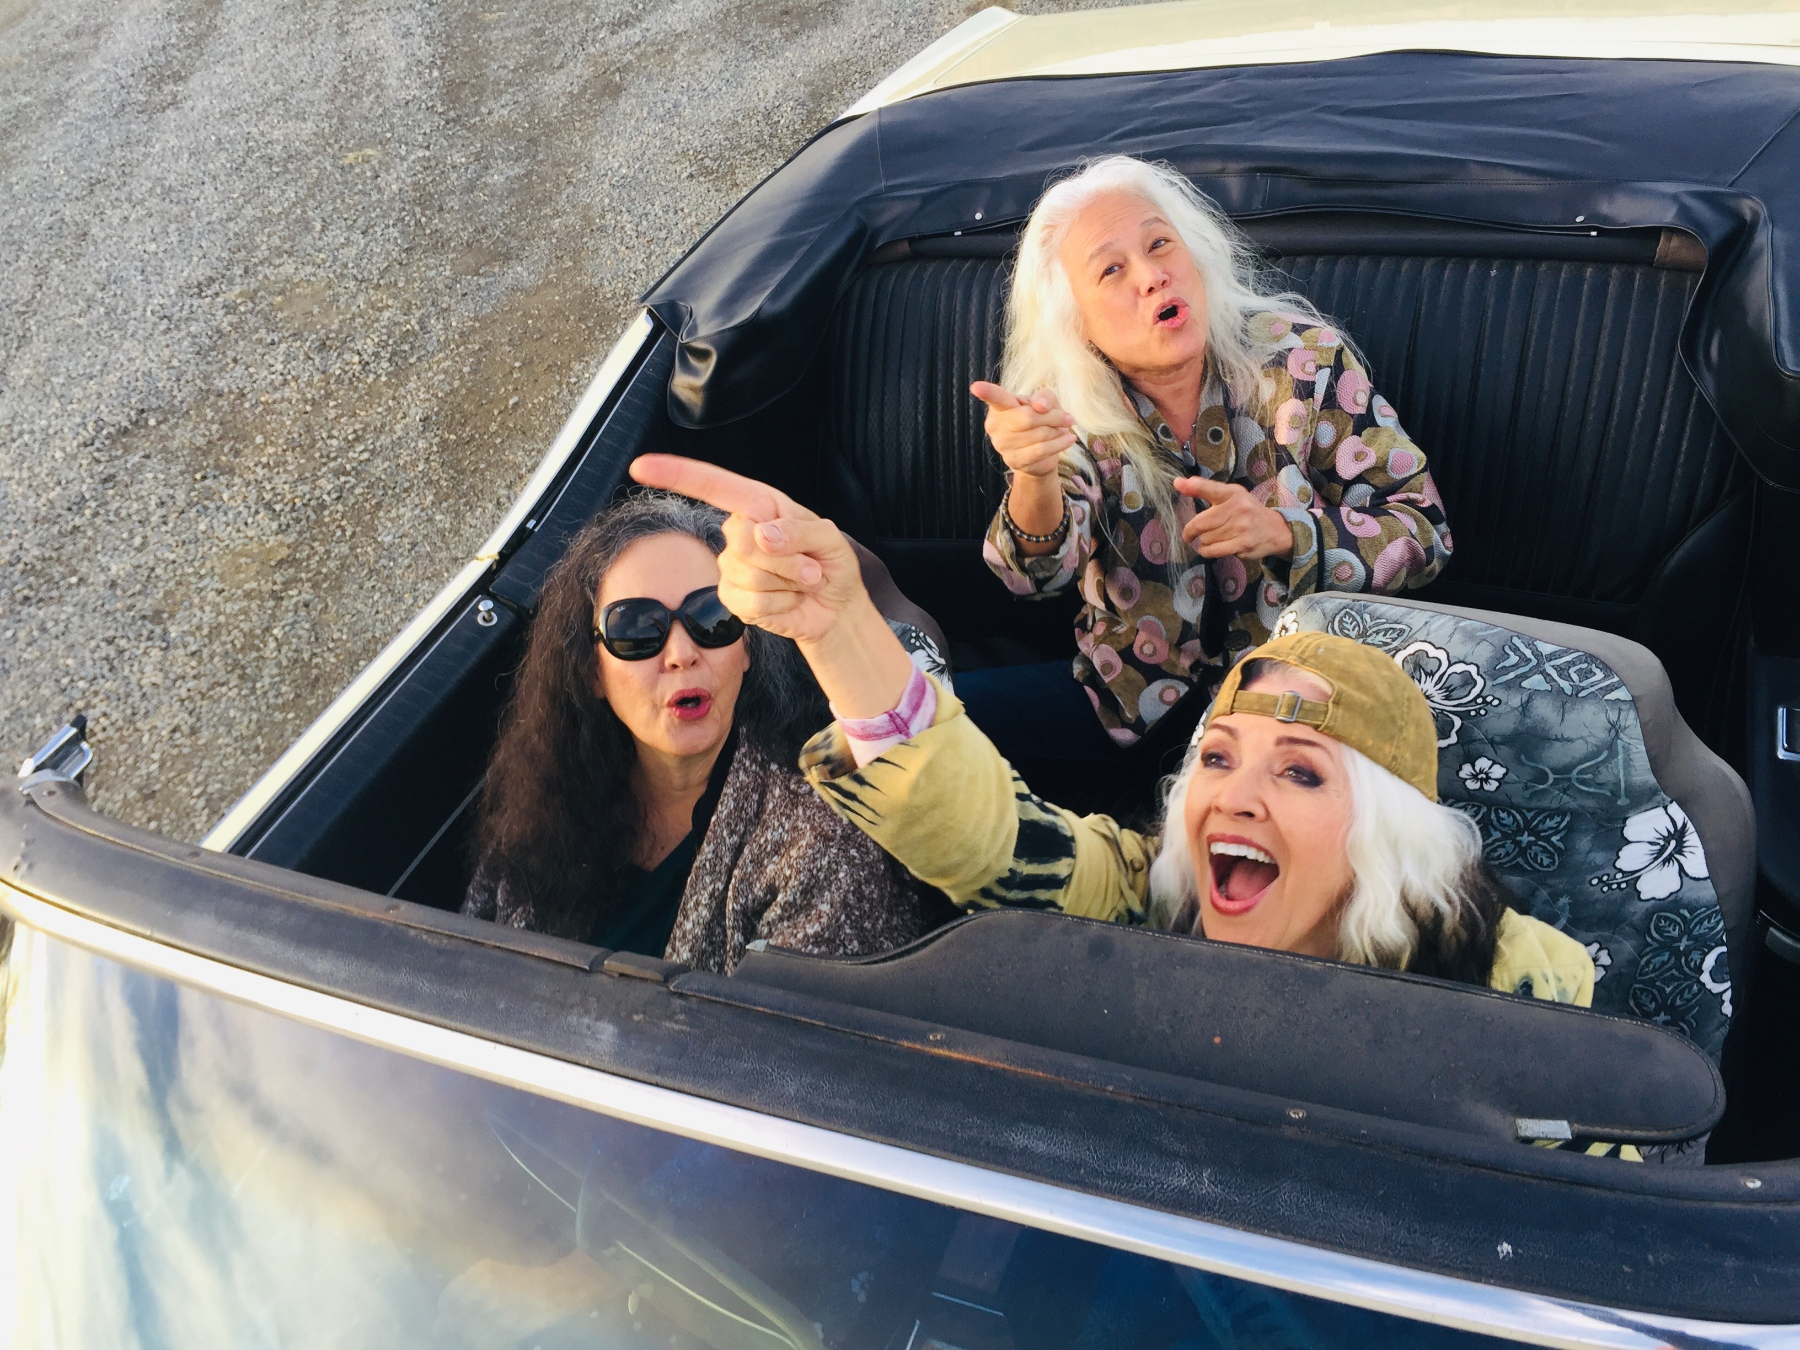 Three women smiling in a convertible car.